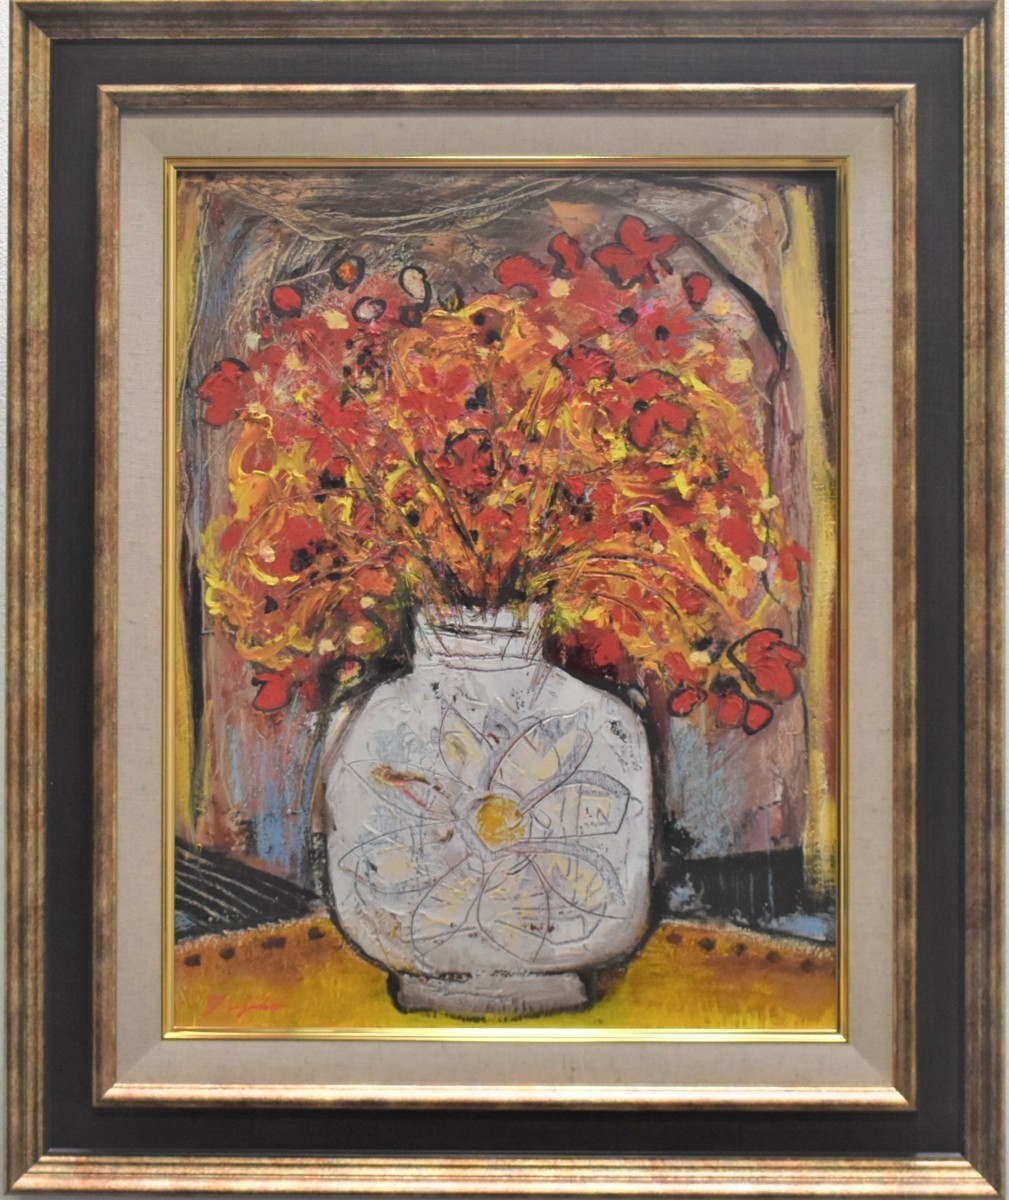 [Masami Gallery] Recommended work! Fujiko Shirai 6F Flowers Oil painting [5000 pieces on display! You're sure to find a work you like], Painting, Oil painting, Still life